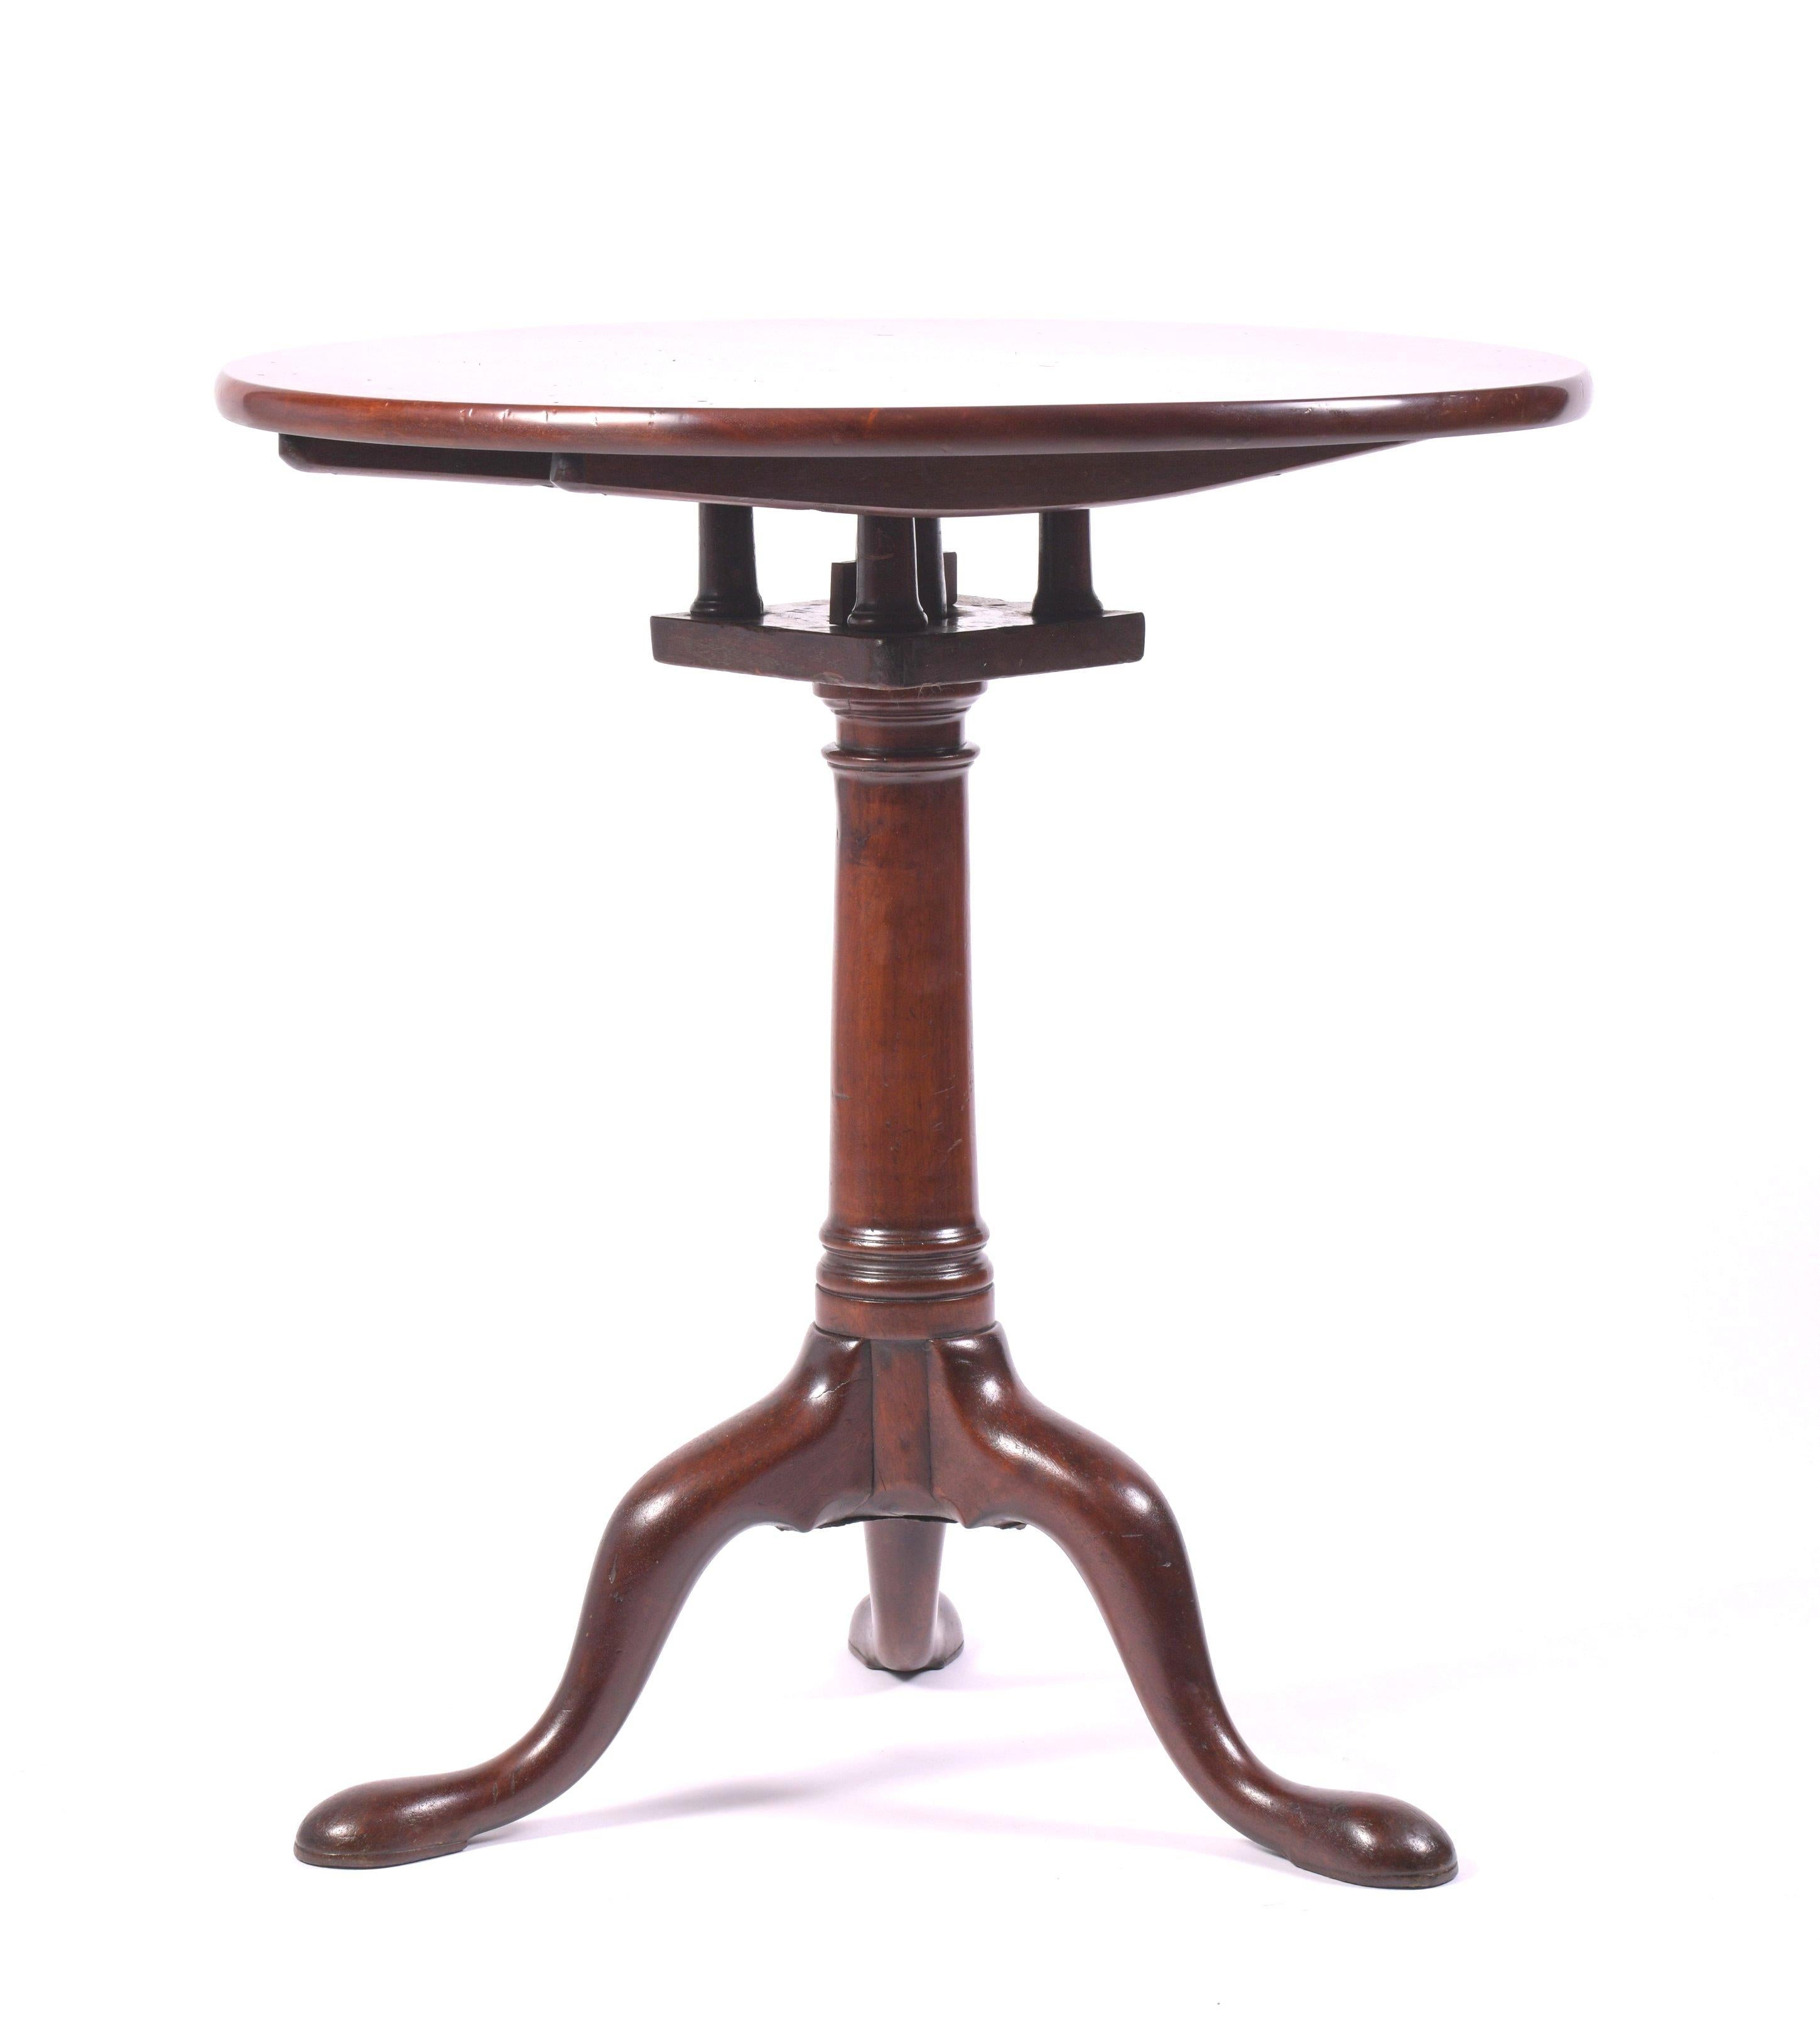 This simple yet Classic style 18th century mahogany tilt-top table features a ‘birdcage‘ design underneath the tabletop and is supported on a central column with a tripod base. It measures 27 ½ in – 70 cm high with the table open and 41 ¾ in – 106